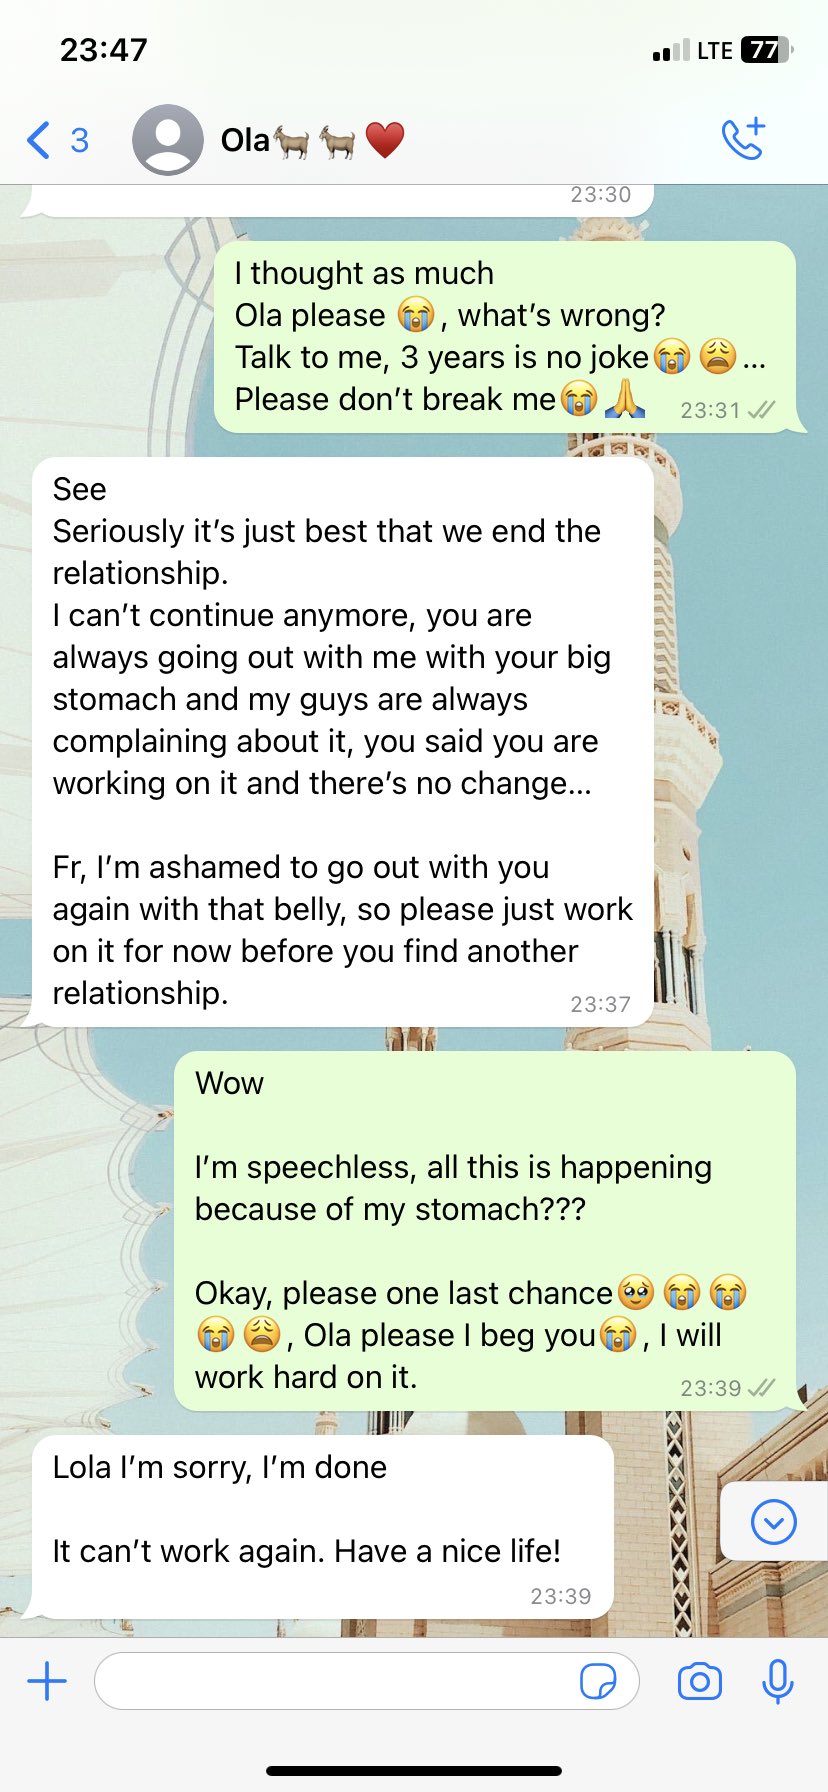 Lady narrates how her boyfriend of 3 years dumped her over her big stomach